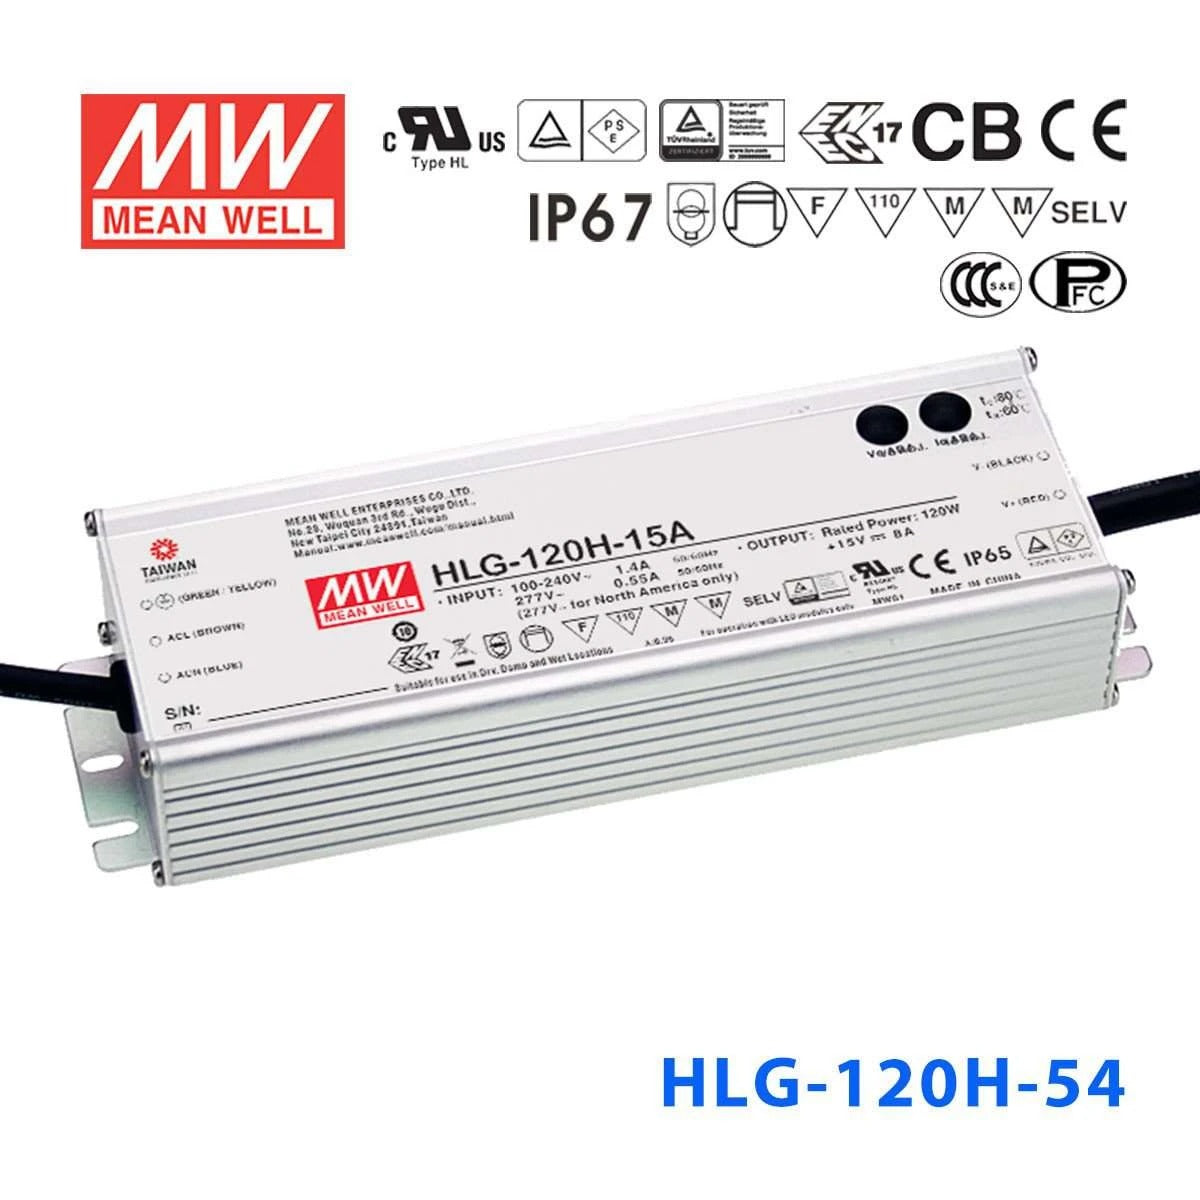 Mean Well HLG-120H-54 Power Supply 120W 54V